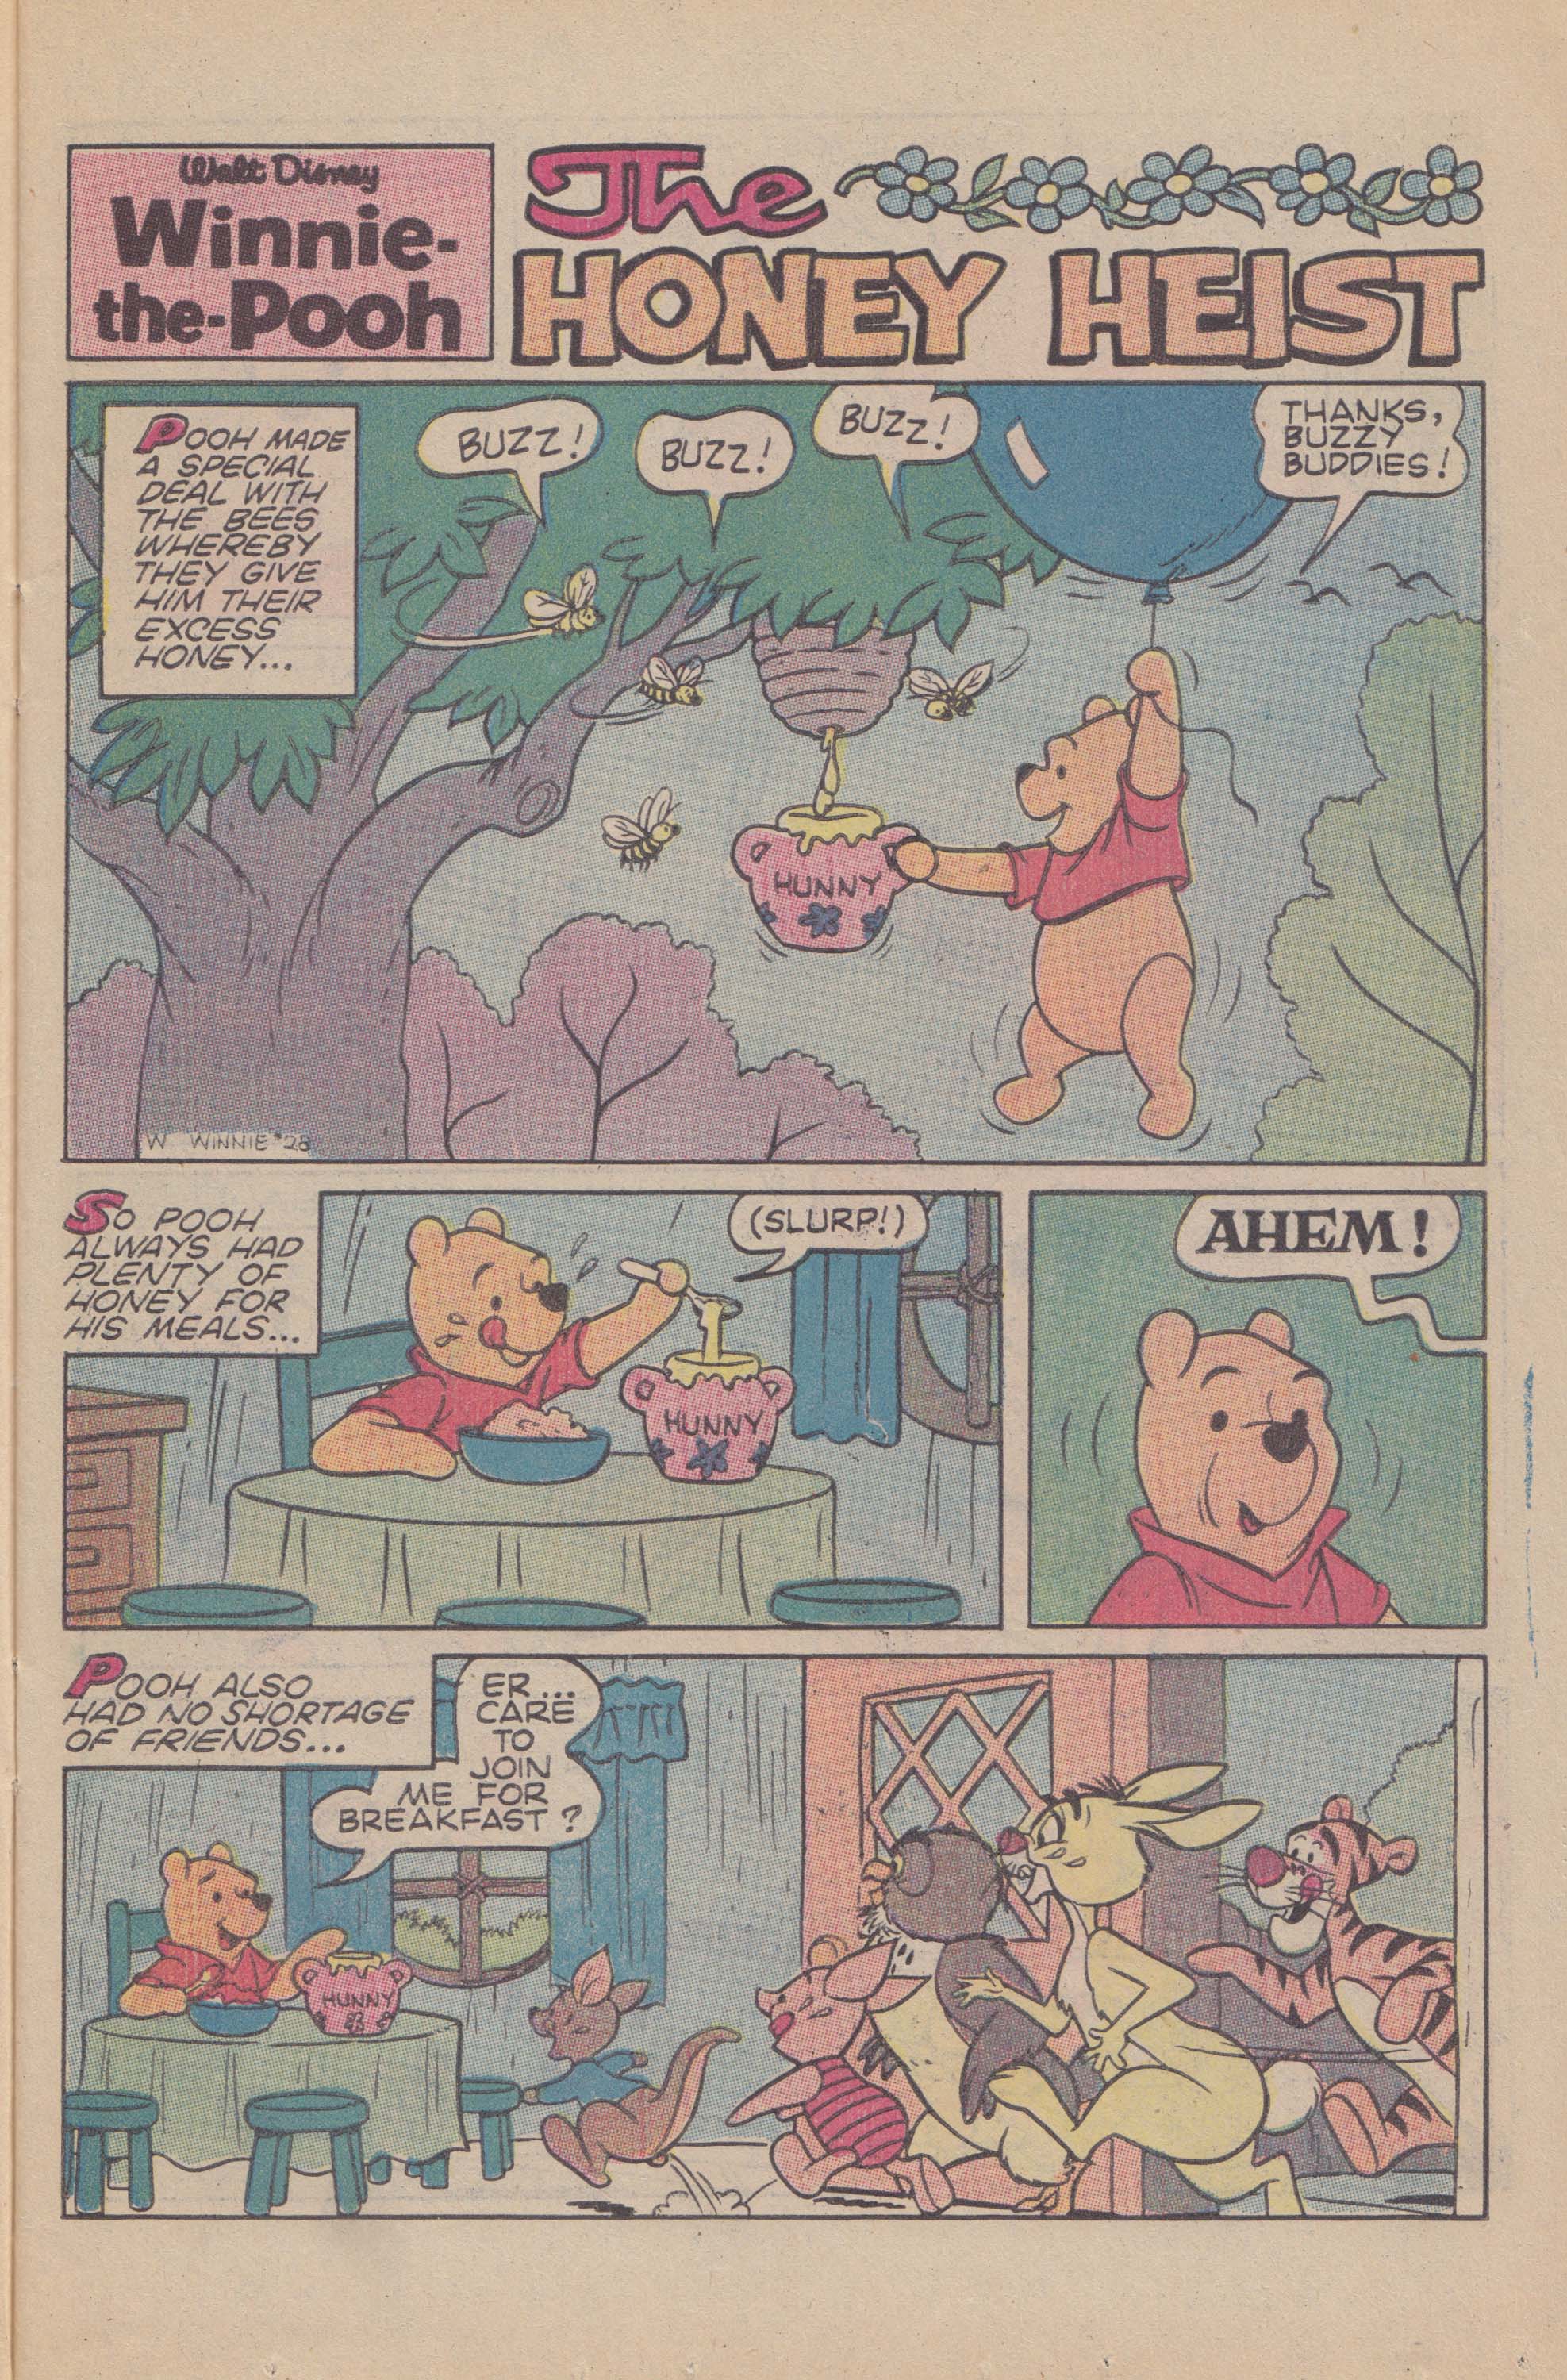 Read online Winnie-the-Pooh comic -  Issue #28 - 11